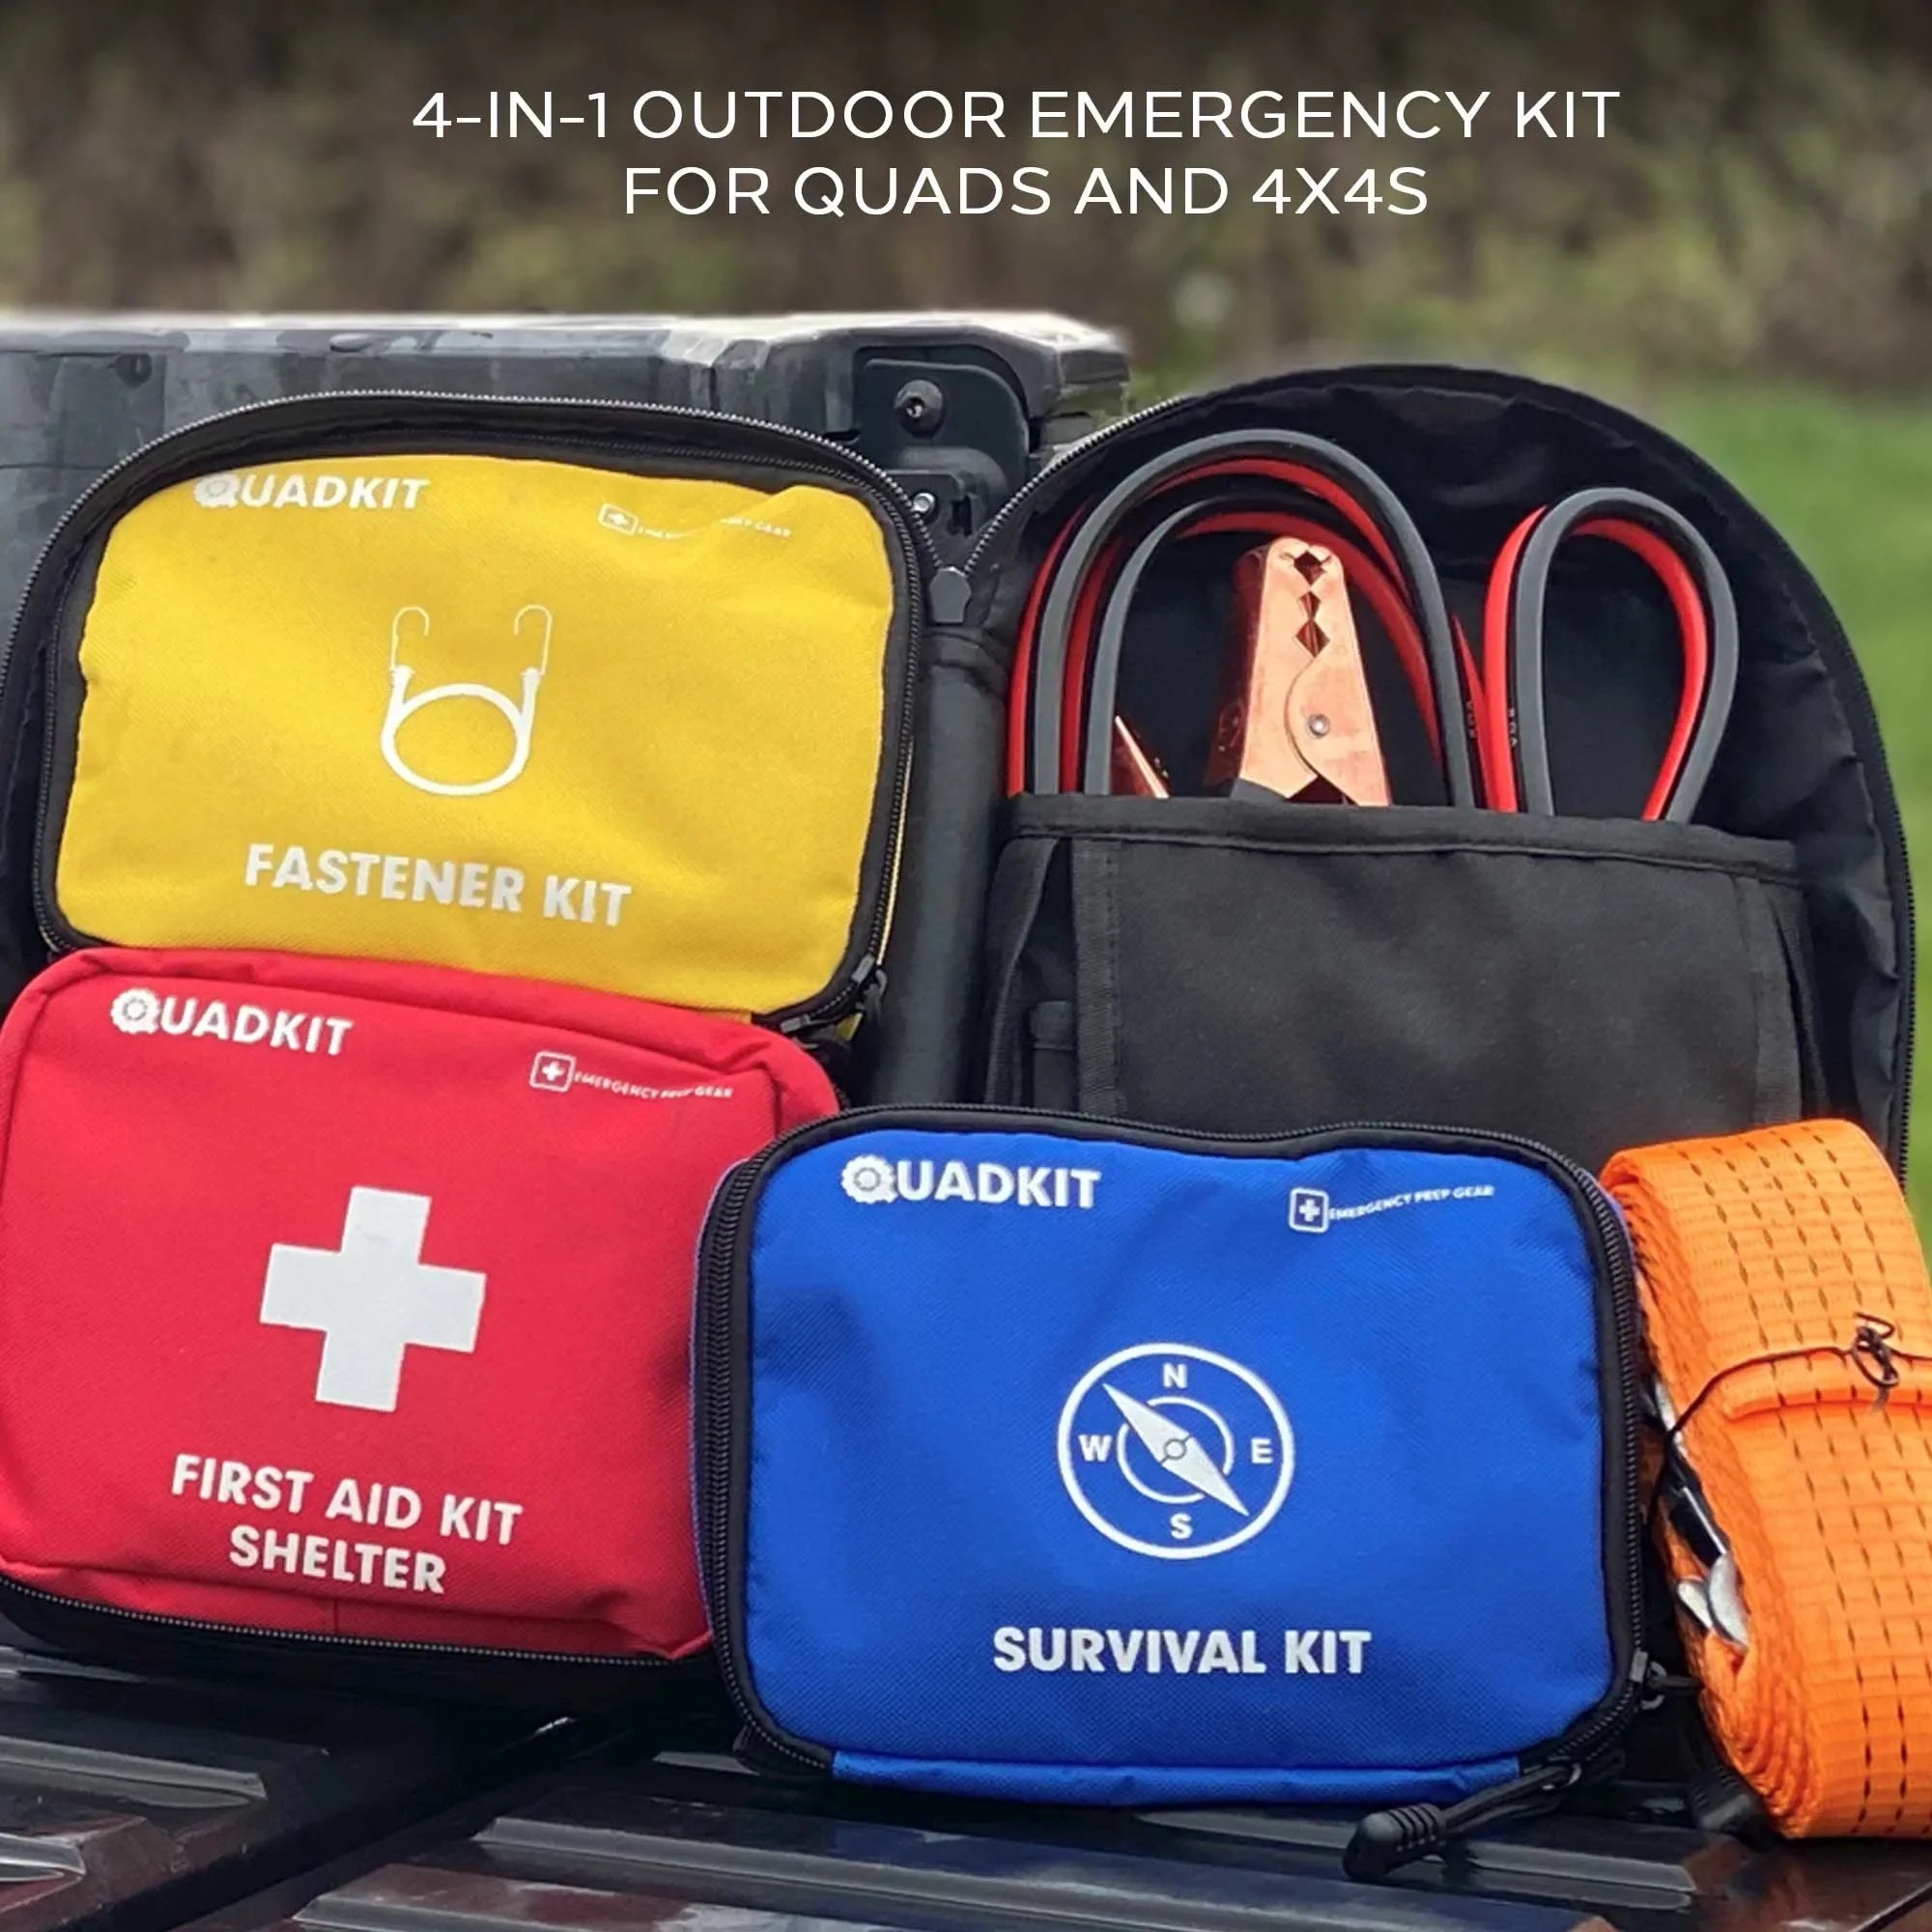 QUADKIT ATV Emergency Kit - Survival Kit & Military Tools Kit 106 Essential Items Camping First Aid Kit Gifts for Men